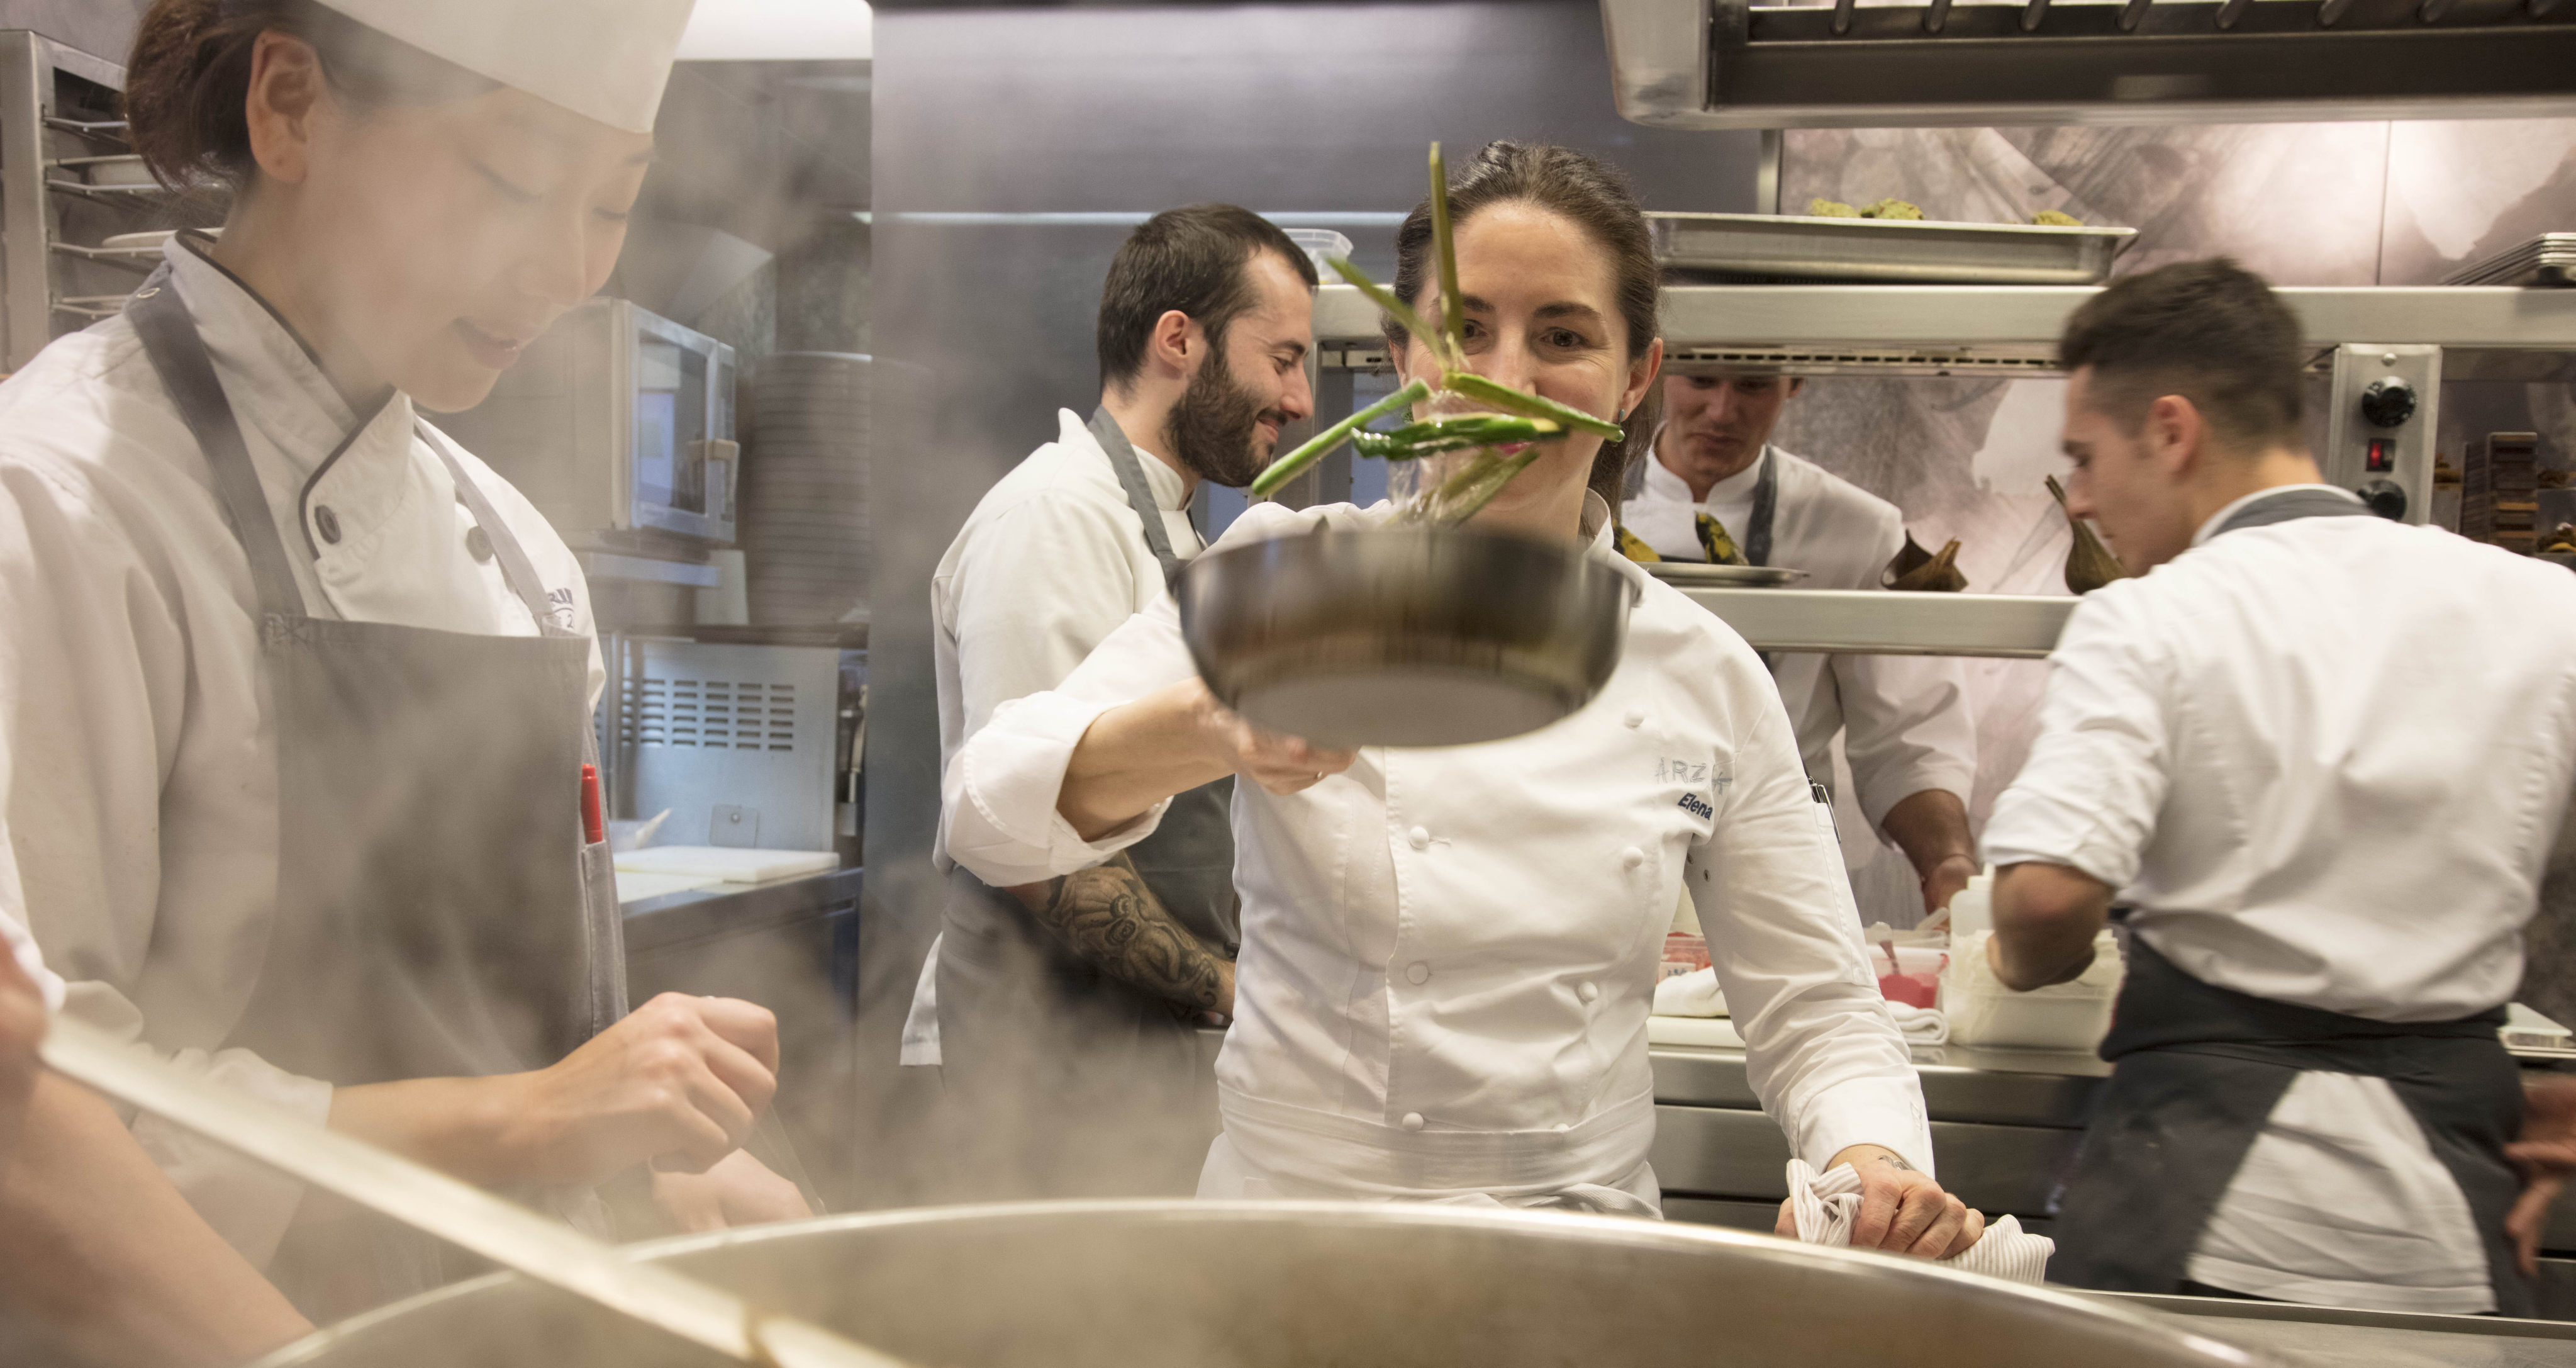 Elena Arzak is the fourth-generation chef of three-Michelin-star, 126-year-old  Basque family restaurant Arzak. She talks about evolving her father’s groundbreaking approach to the Spanish region’s cuisine. Photo: Mikel Alonso